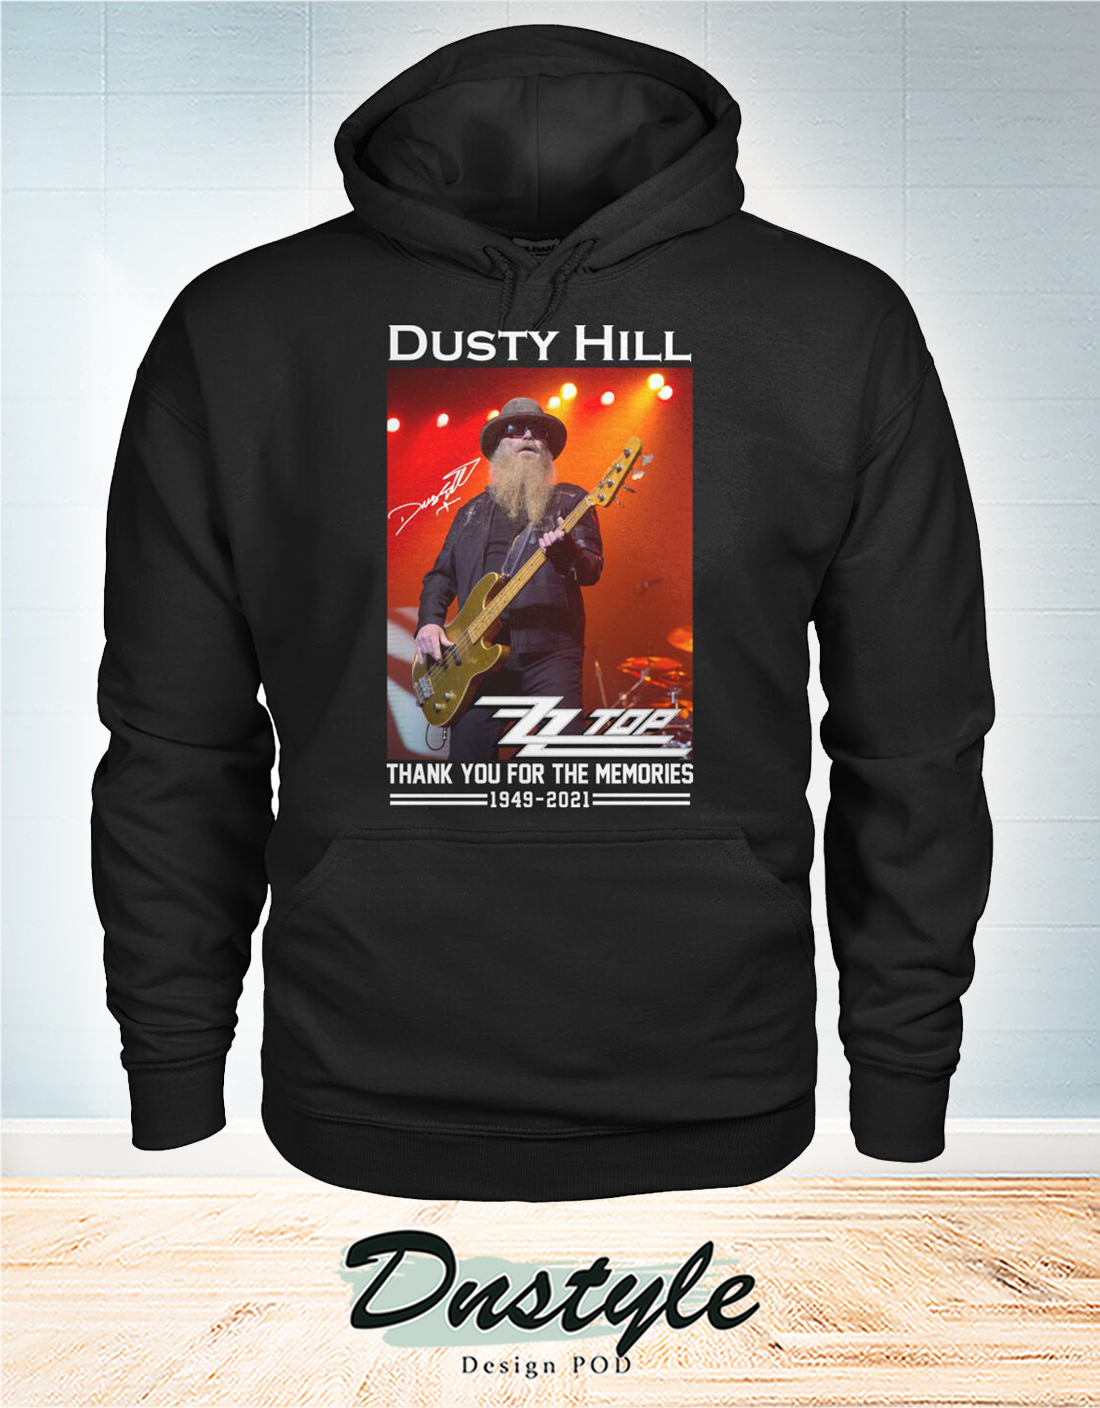 Zz Top Dusty Hill thanks for the memories shirt